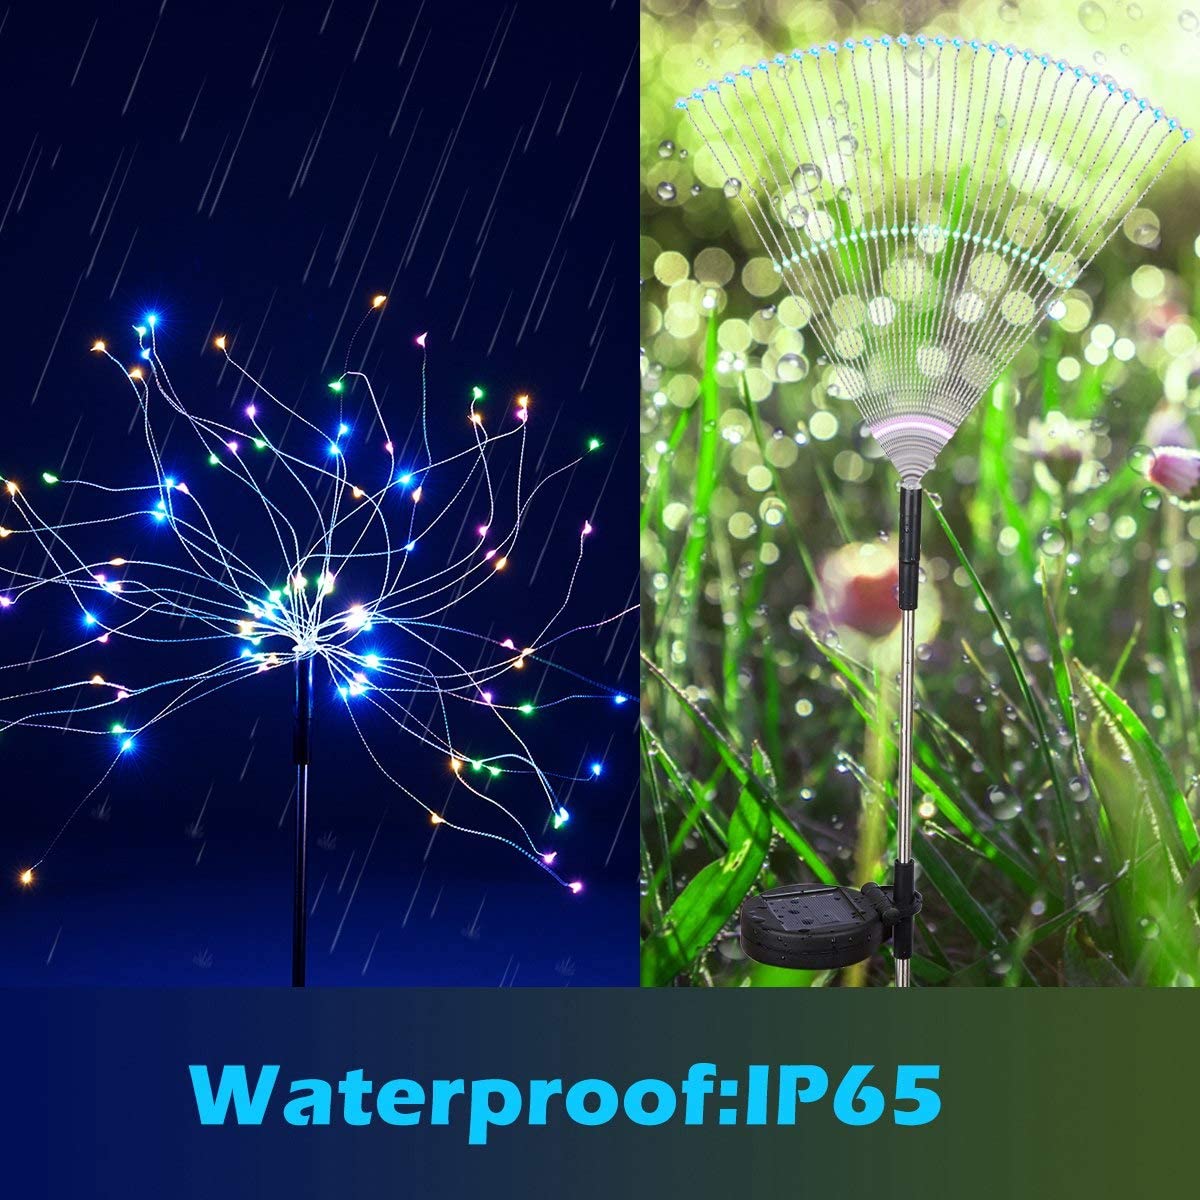 Solar Lights Outdoor - 2 Pack Solar Garden Lights Outdoor Decorative with 120 LED Powered 40 Copper Wires Multi Color Solar Fireworks Lights for Walkway Patio Backyard Yard Lawn Christmas - image 2 of 8